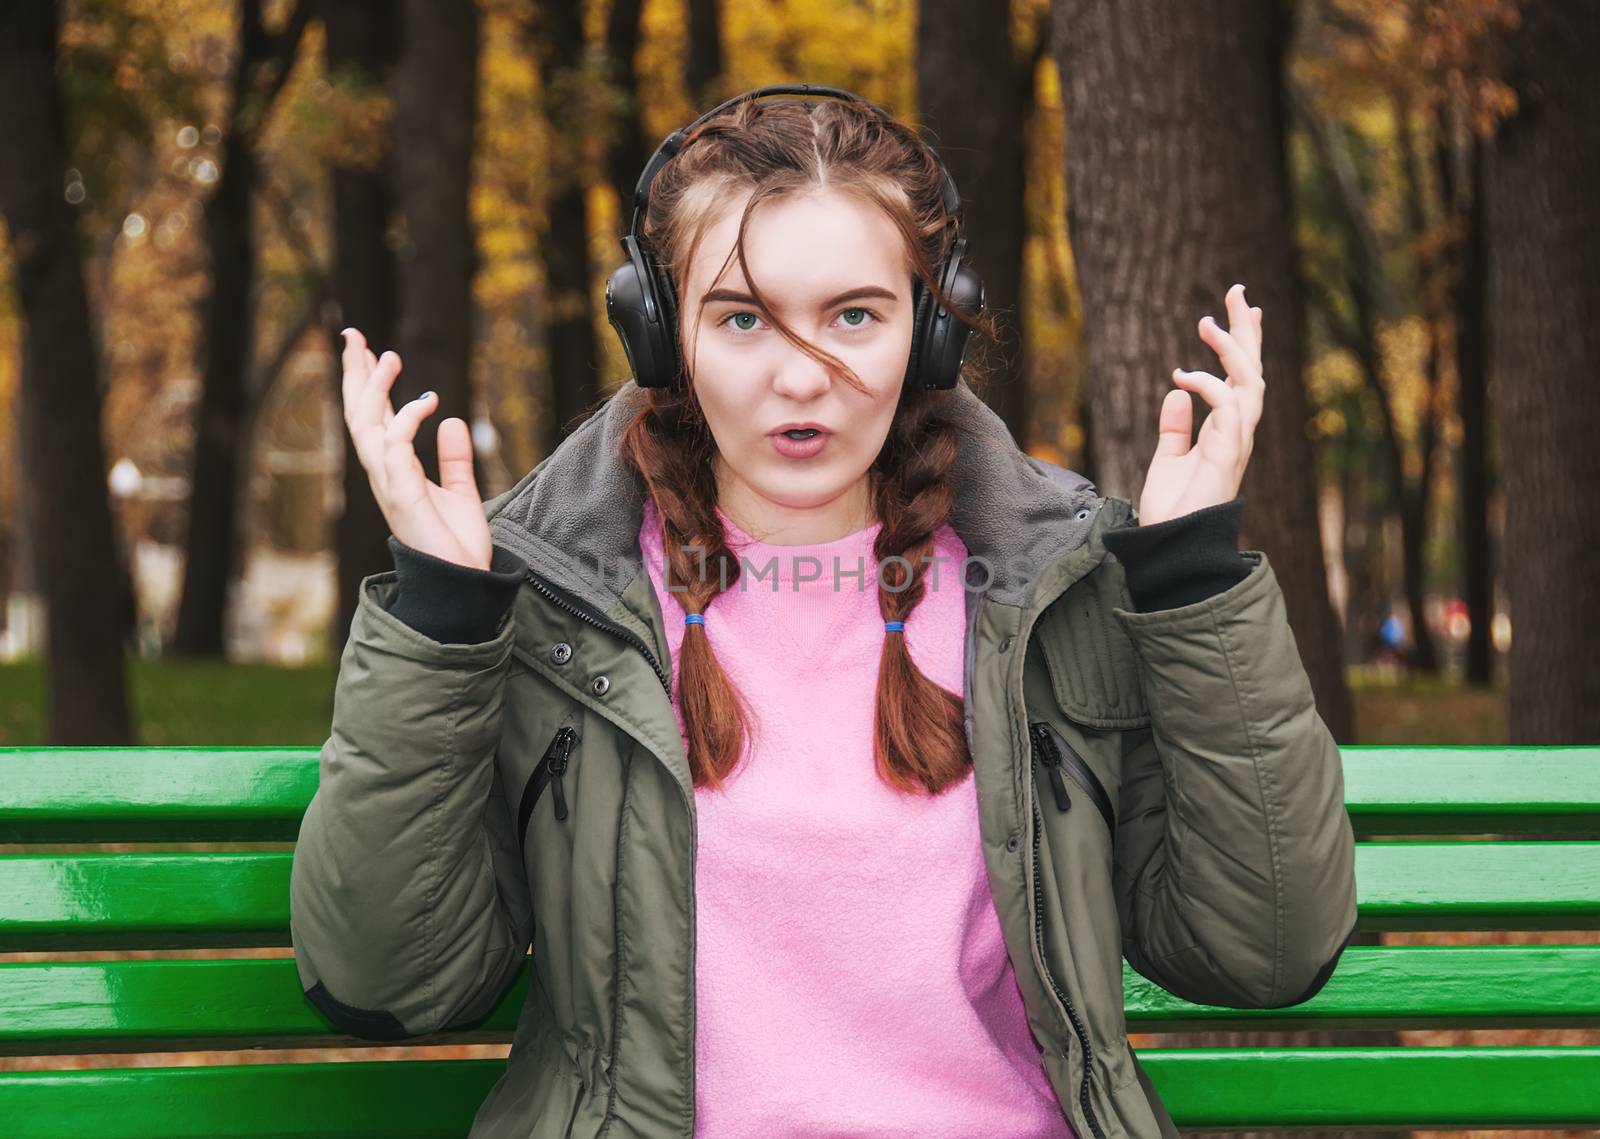 Surprised young girl with headphones by Cipariss